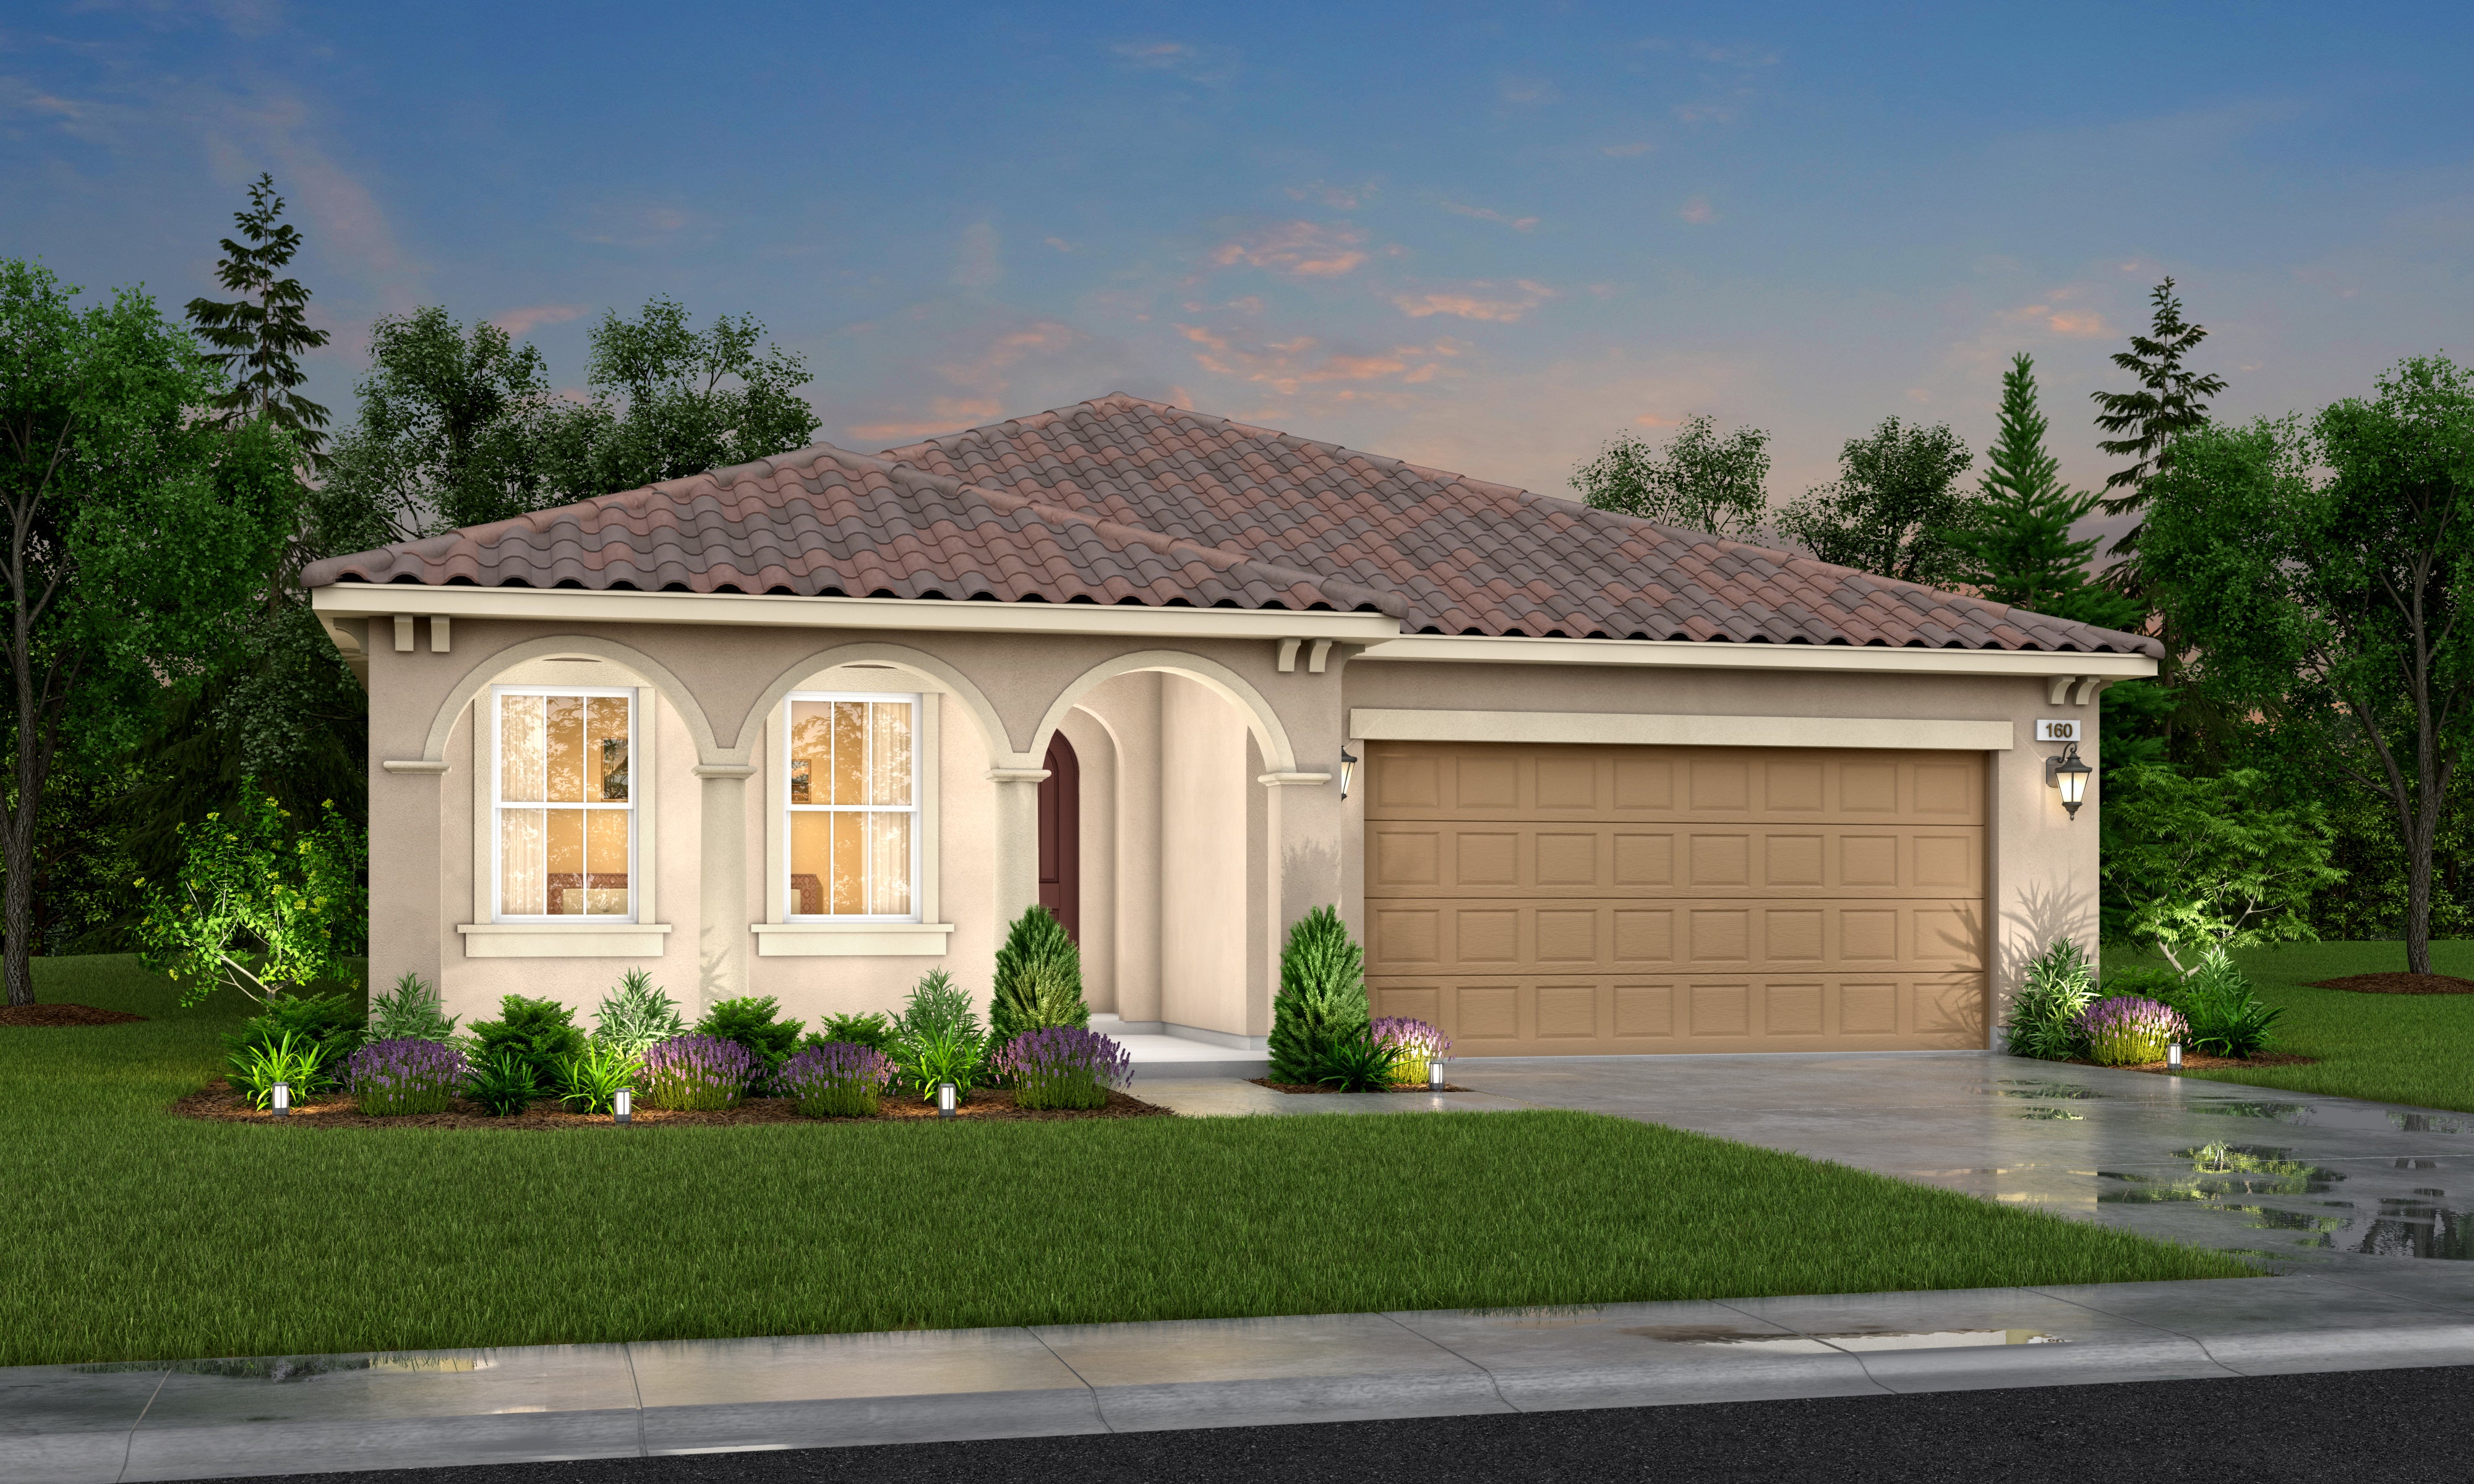 60% Sold Out In Less Than 4 Hours After Successful De Young Verano at Tesoro Viejo Phase 1 Virtual Pre-Grand Opening Event!